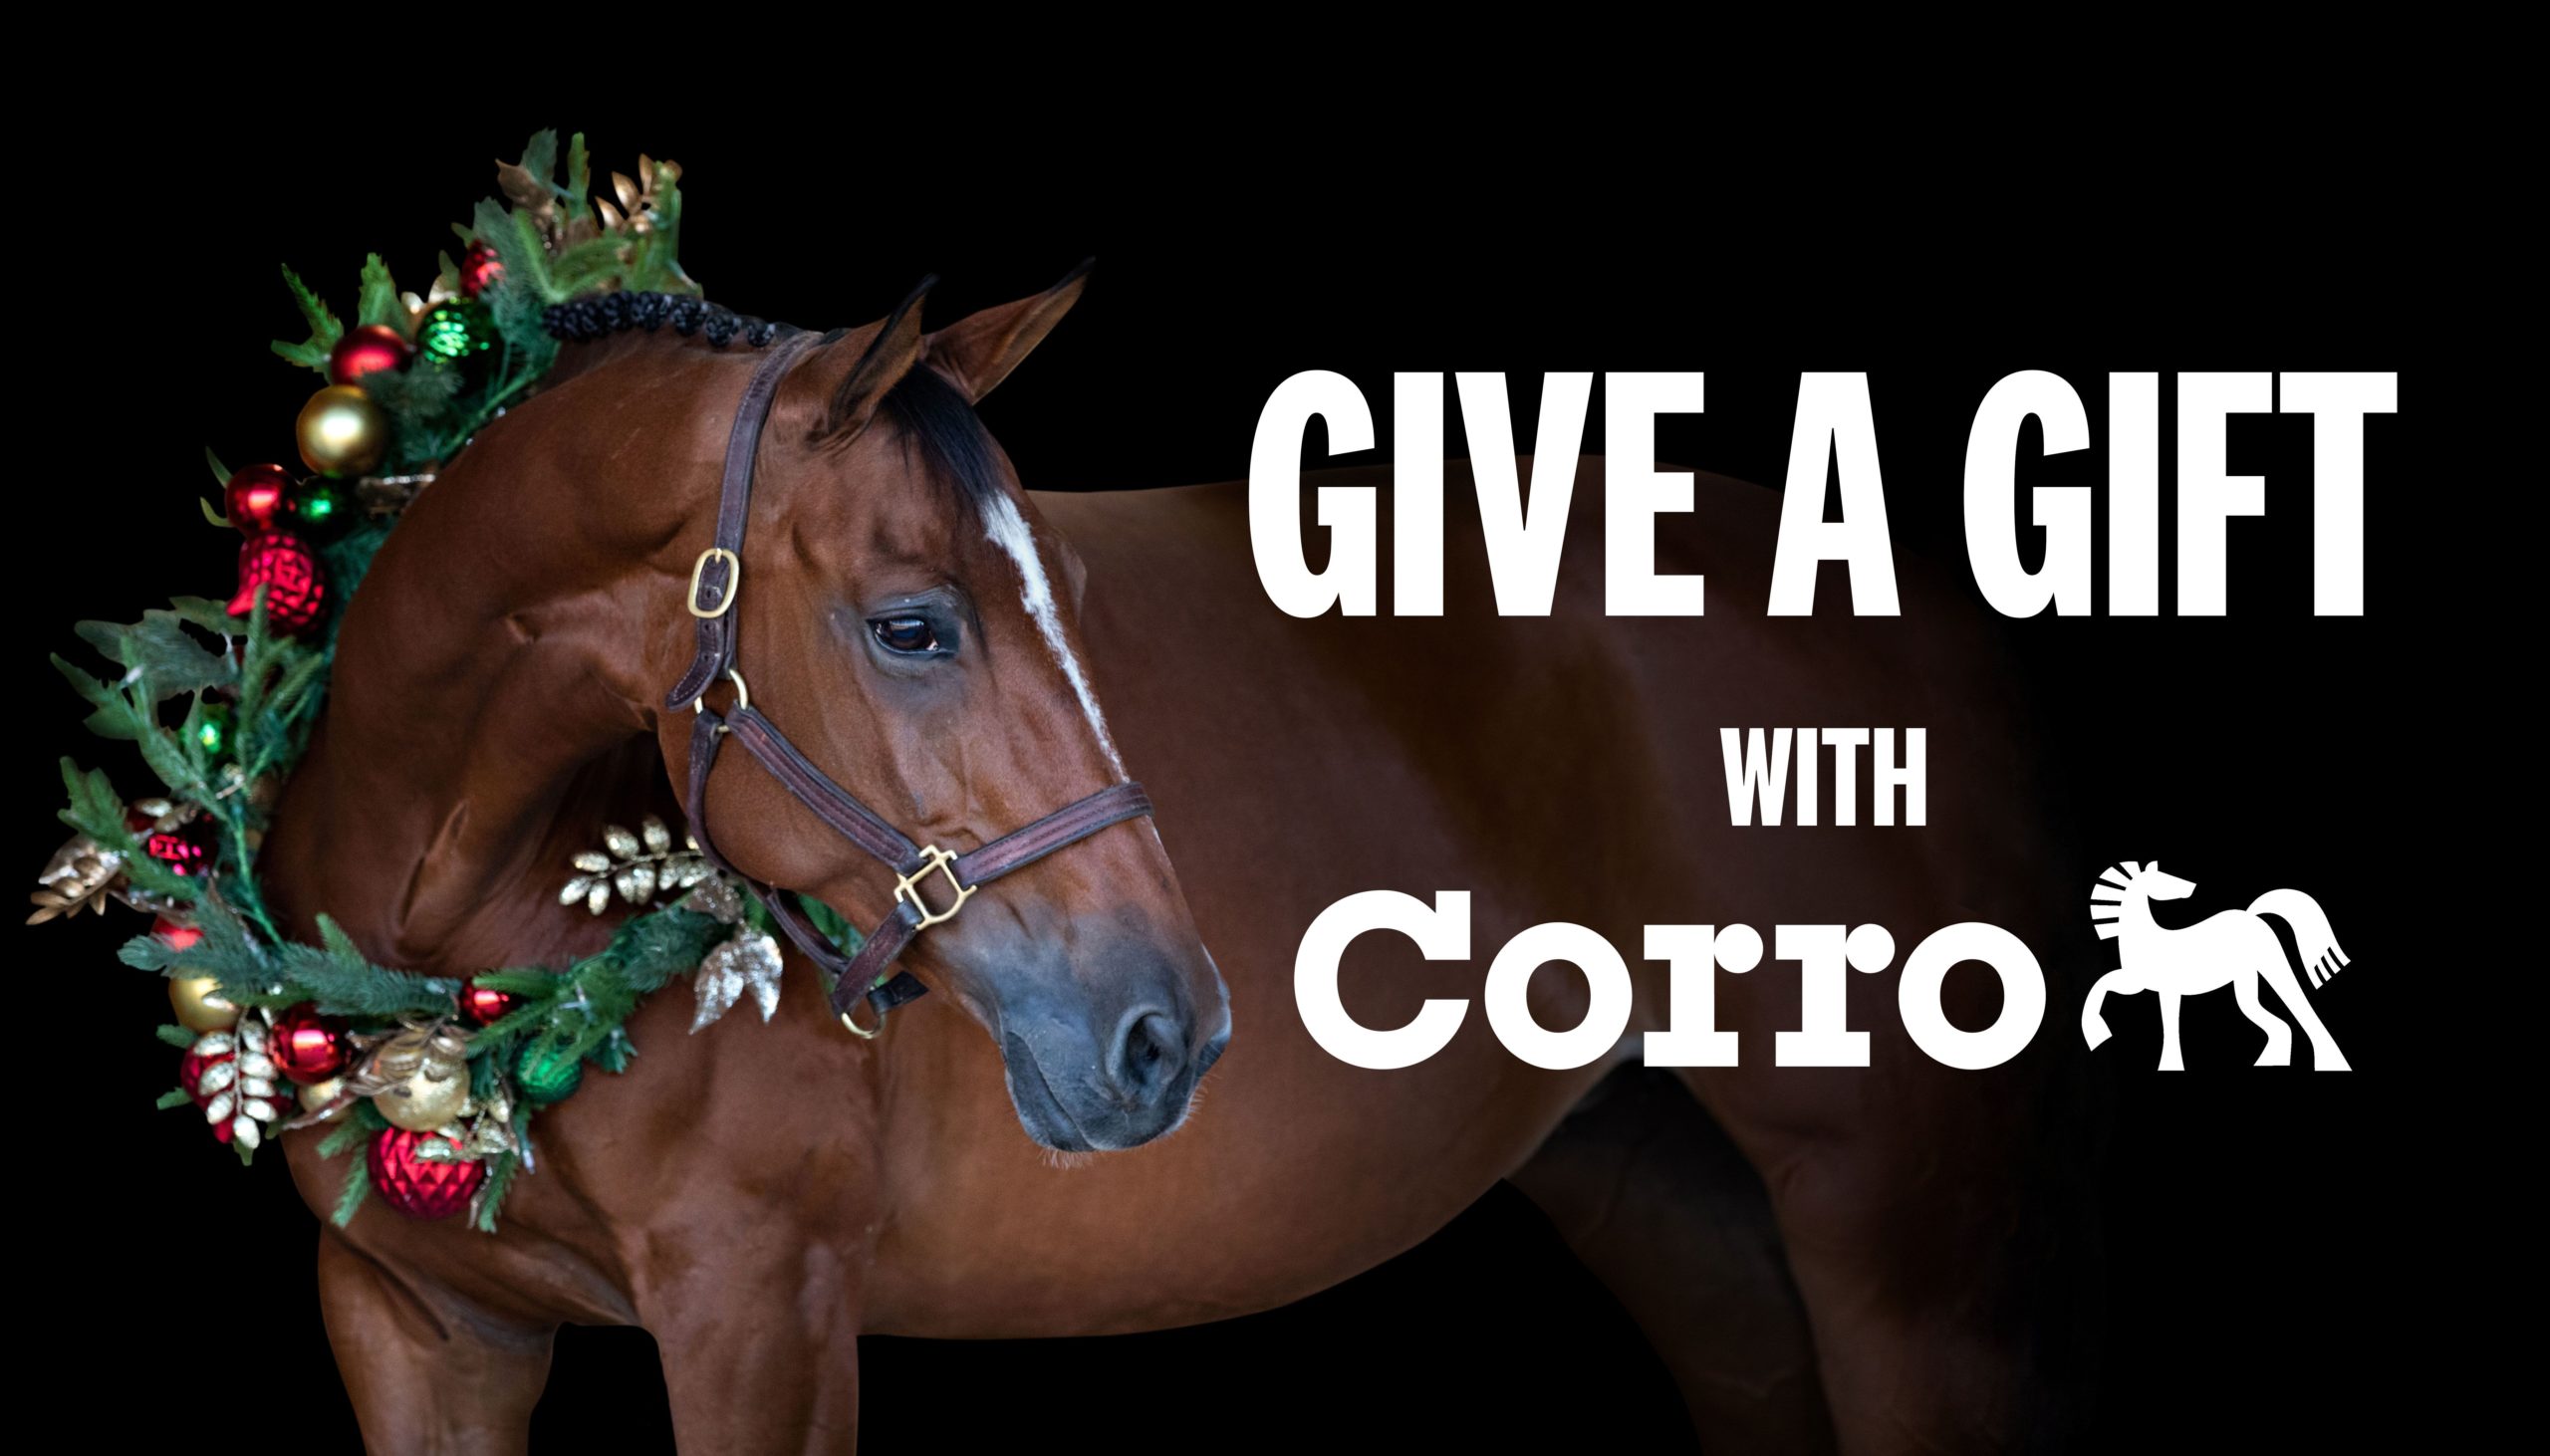 Corro, The One Source for All Things Horse, Extends the Holiday Cheer by Giving Back